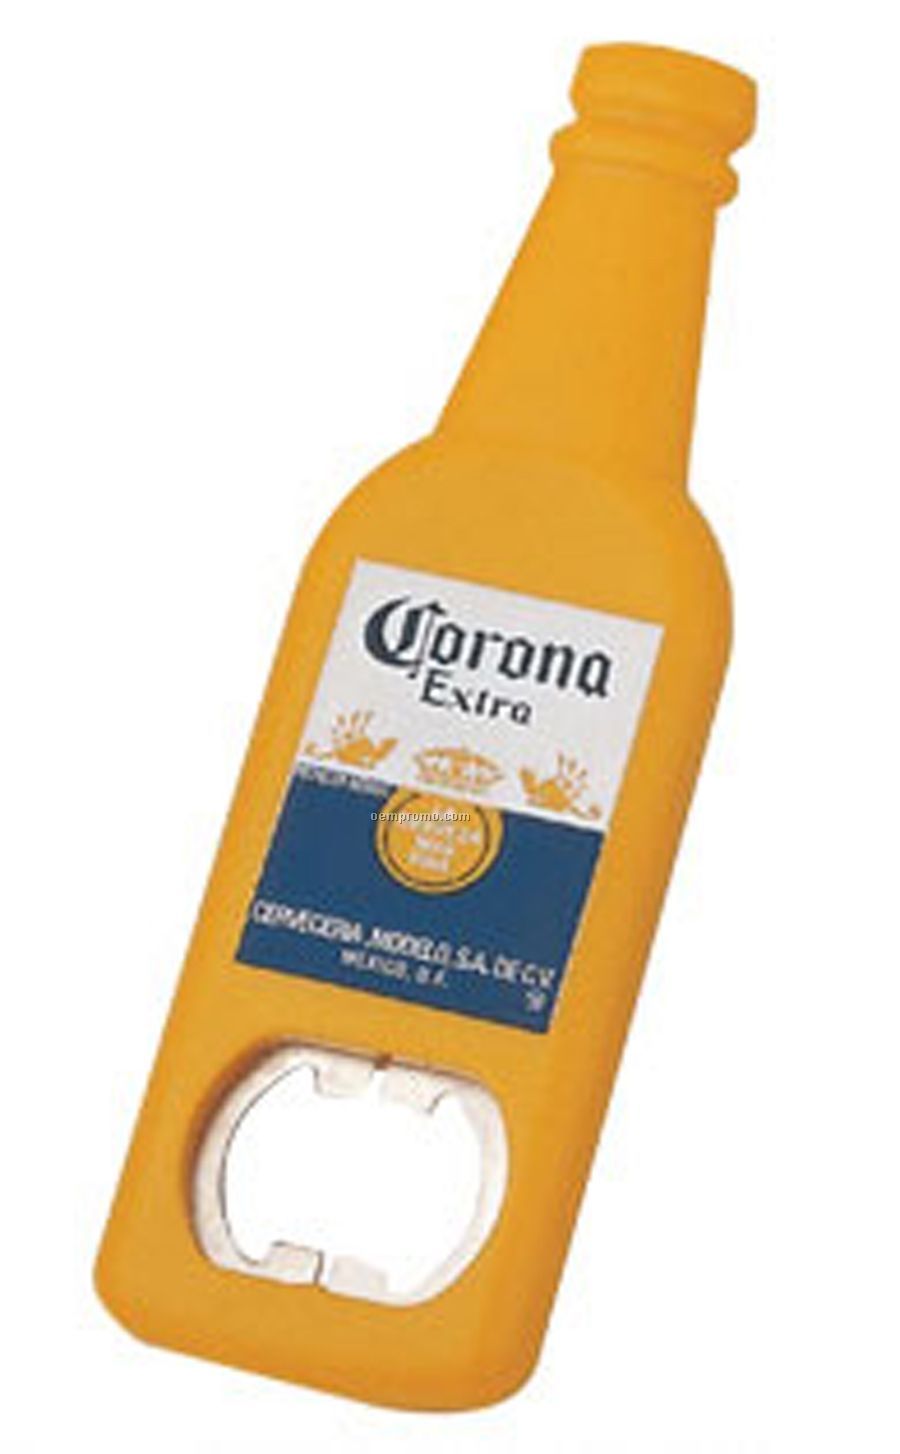 Bottle Shaped Bottle Opener With Voice Recorder